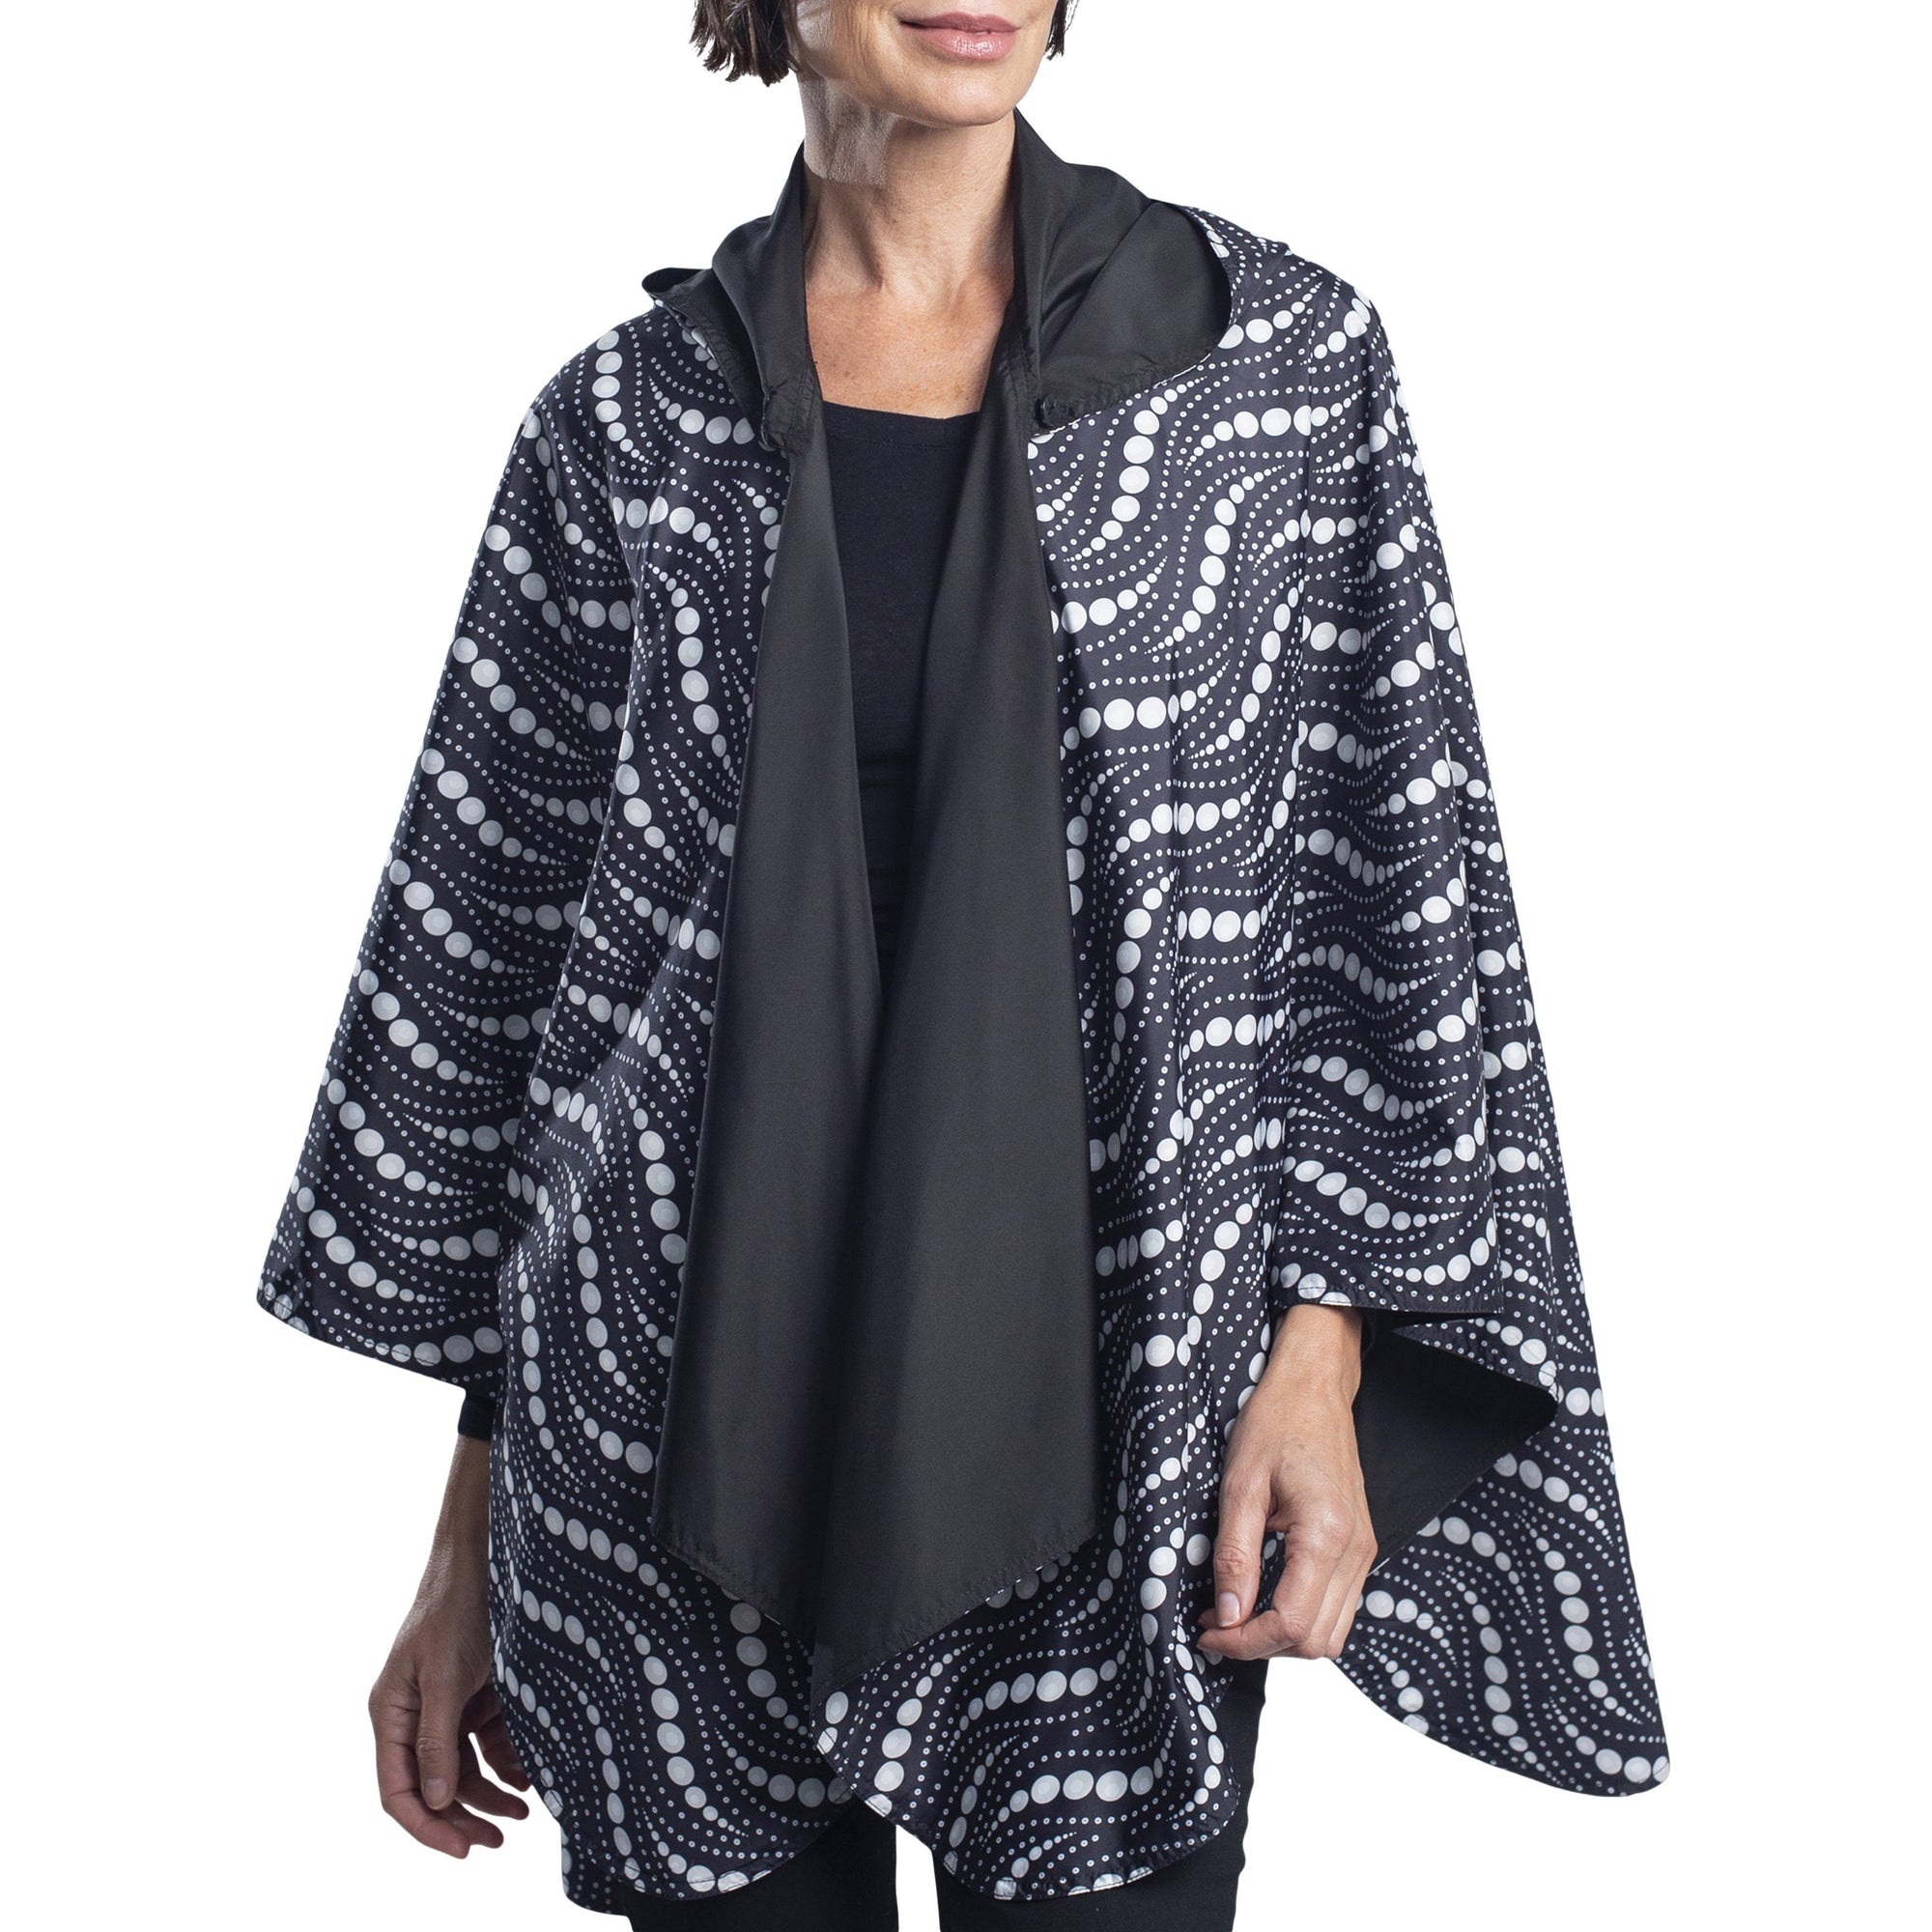 Women wearing a Black/Wavy Pearls Reversible RainCaper travel cape with the Black side out, revealing the Wavy Pearls print at the lapels and cuffs